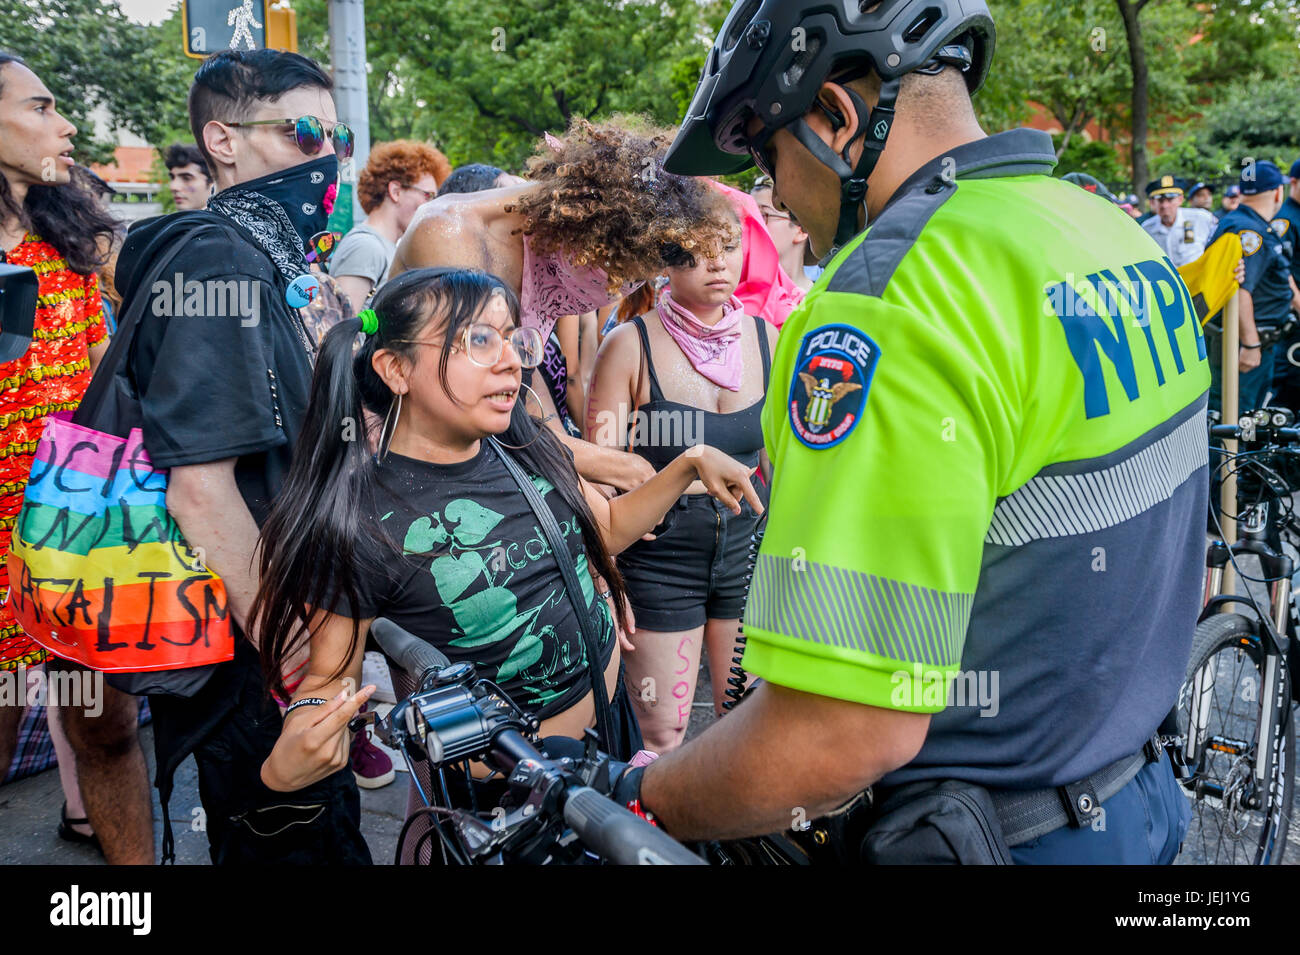 New York, United States. 25th June, 2017. Queer and trans allies, part of the No Justice No Pride movement blocked the NYPD and Toronto Police contingents at the New York City Pride March in pride for Trans and Queer lives. Protesters chained themselves to one another bringing the march to a complete halt. Twelve arrests were made co-facilitated by the Pride March board of directors for blocking police presence out of pride. Credit: Erik McGregor/Pacific Press/Alamy Live News Stock Photo